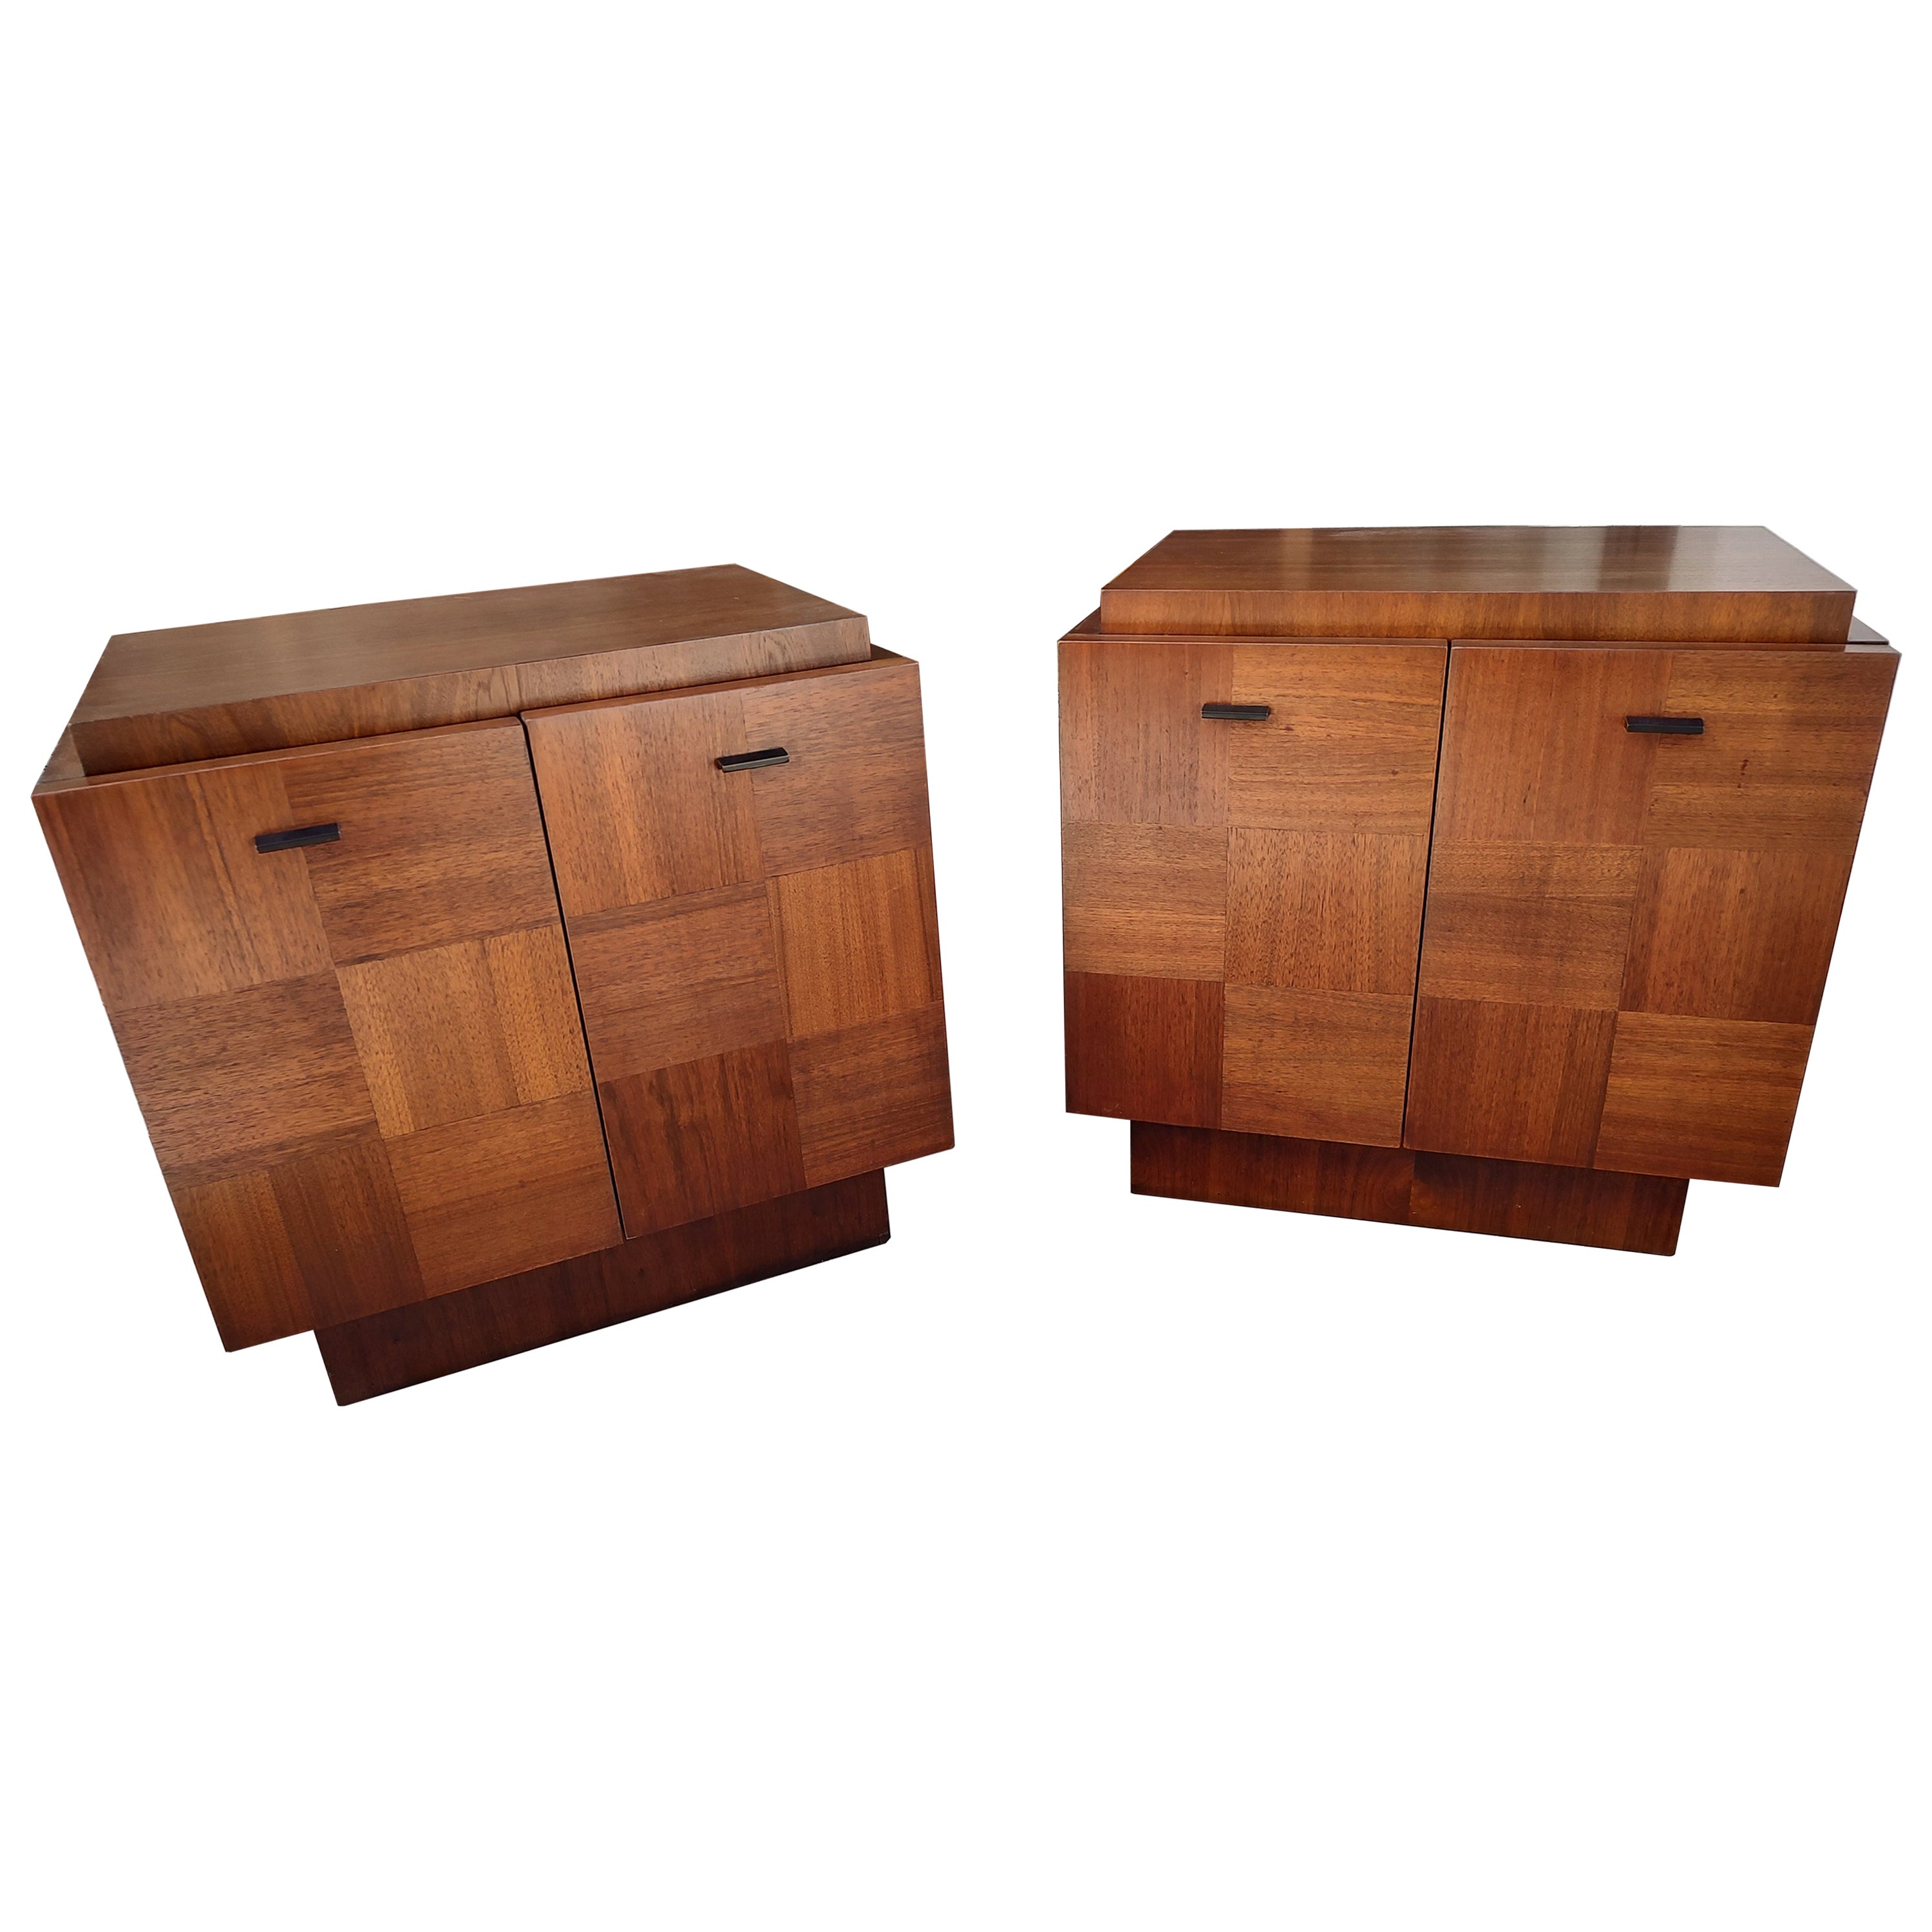 Pair of Mid-Century Modern Night Tables by Lane